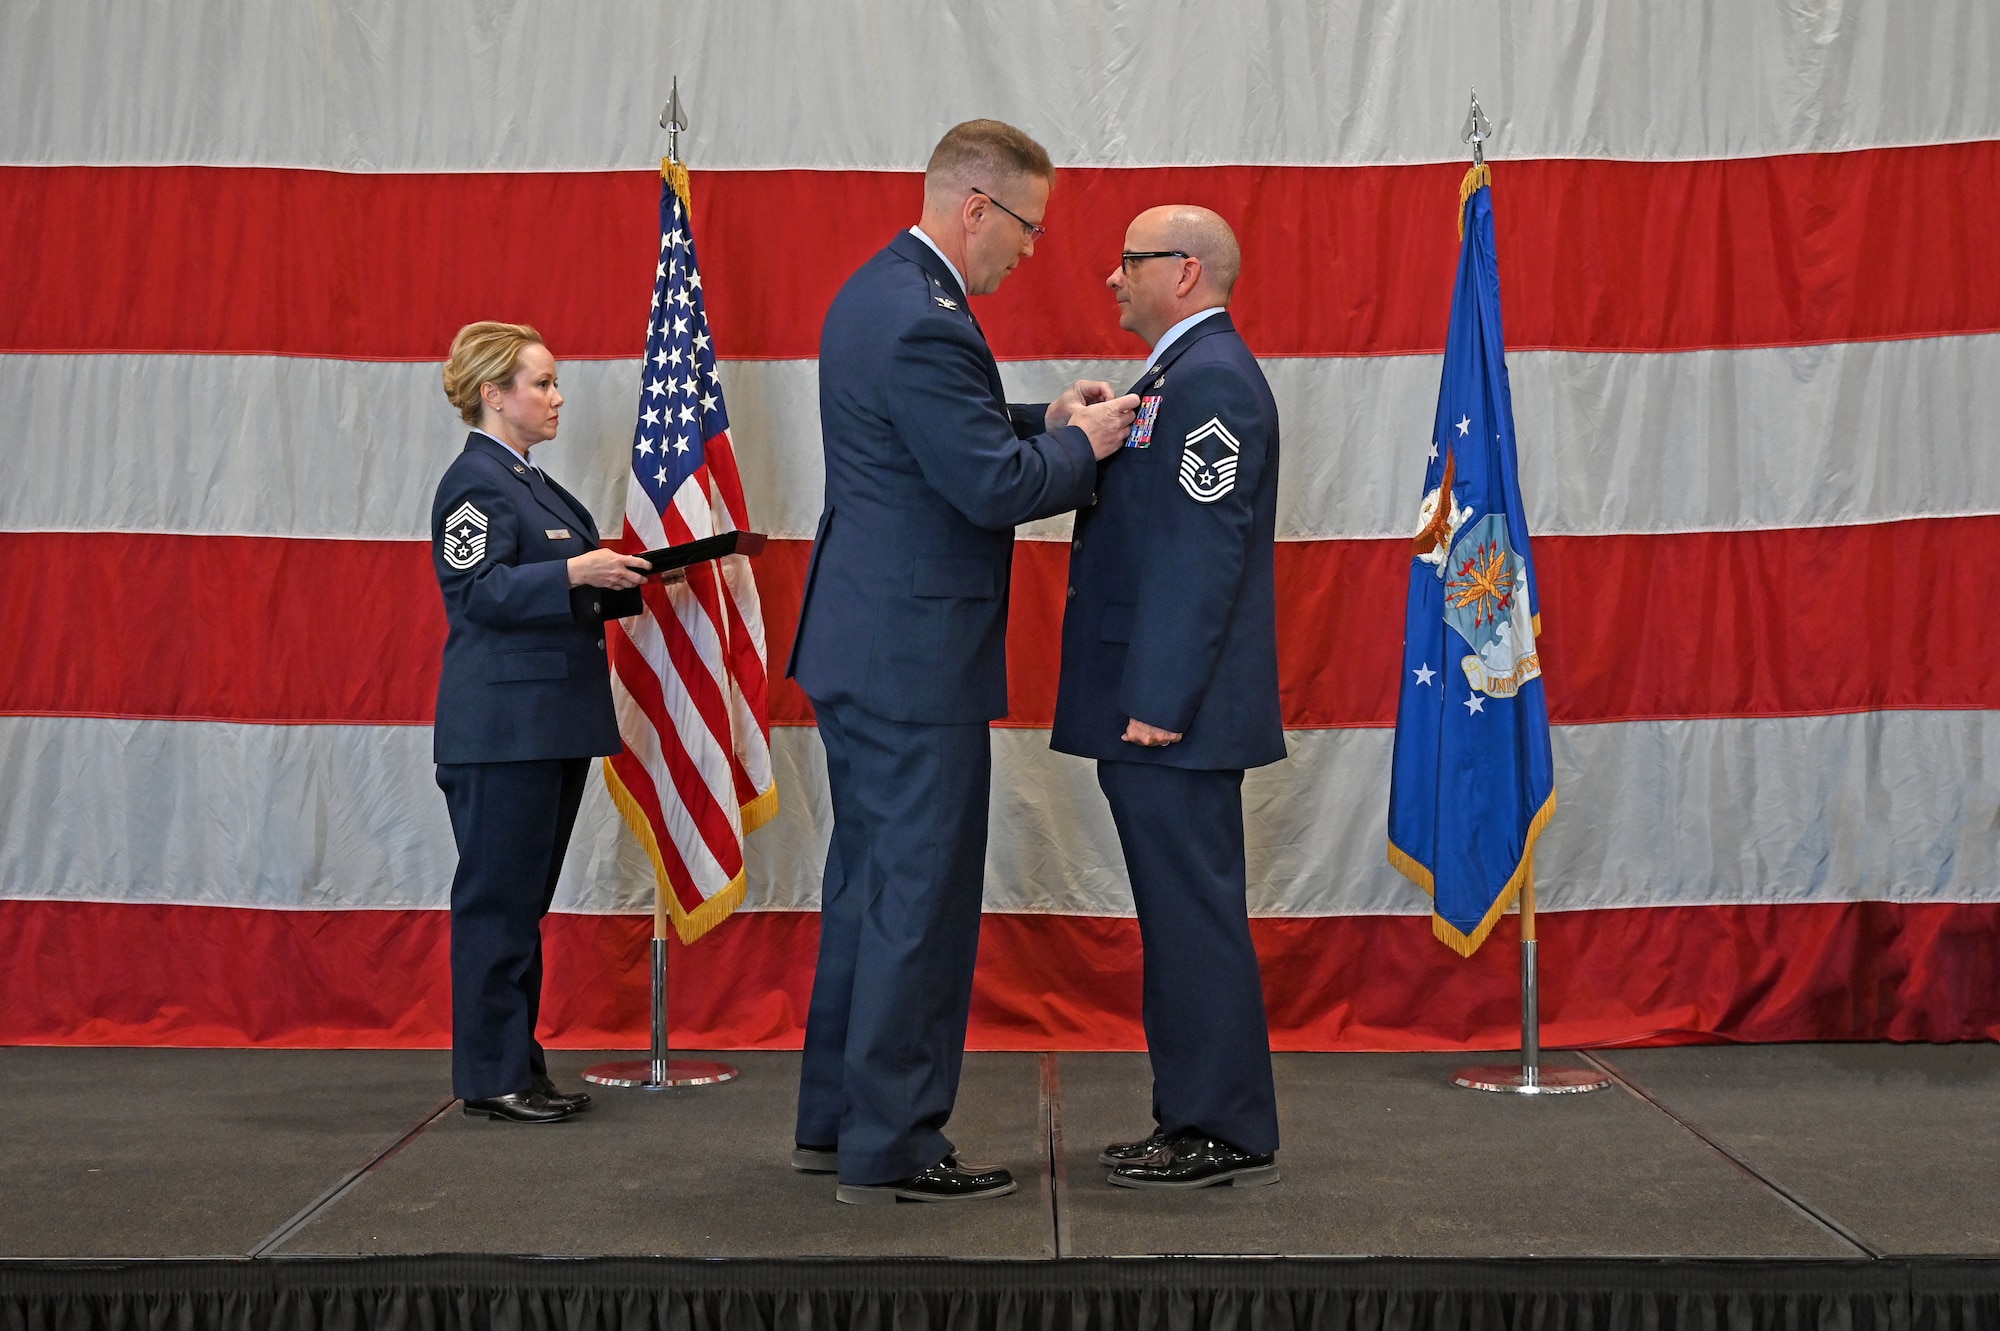 A ceremony was held to award Senior Master Sgt. Edward Lewis the bronze Star medal